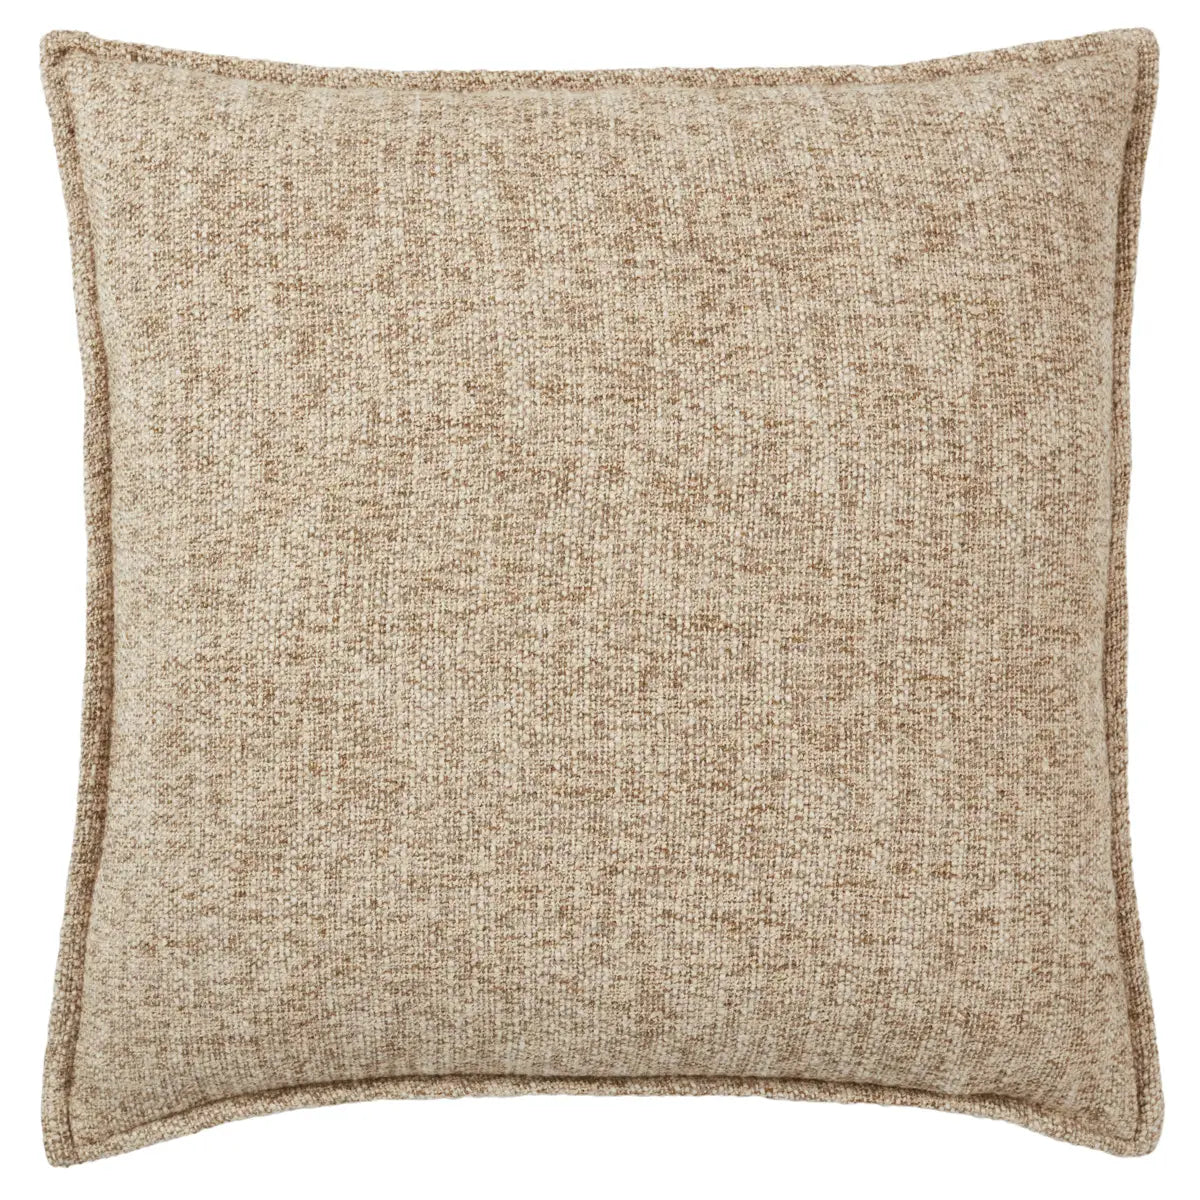 Tanzy Pillow - Light Brown and Cream